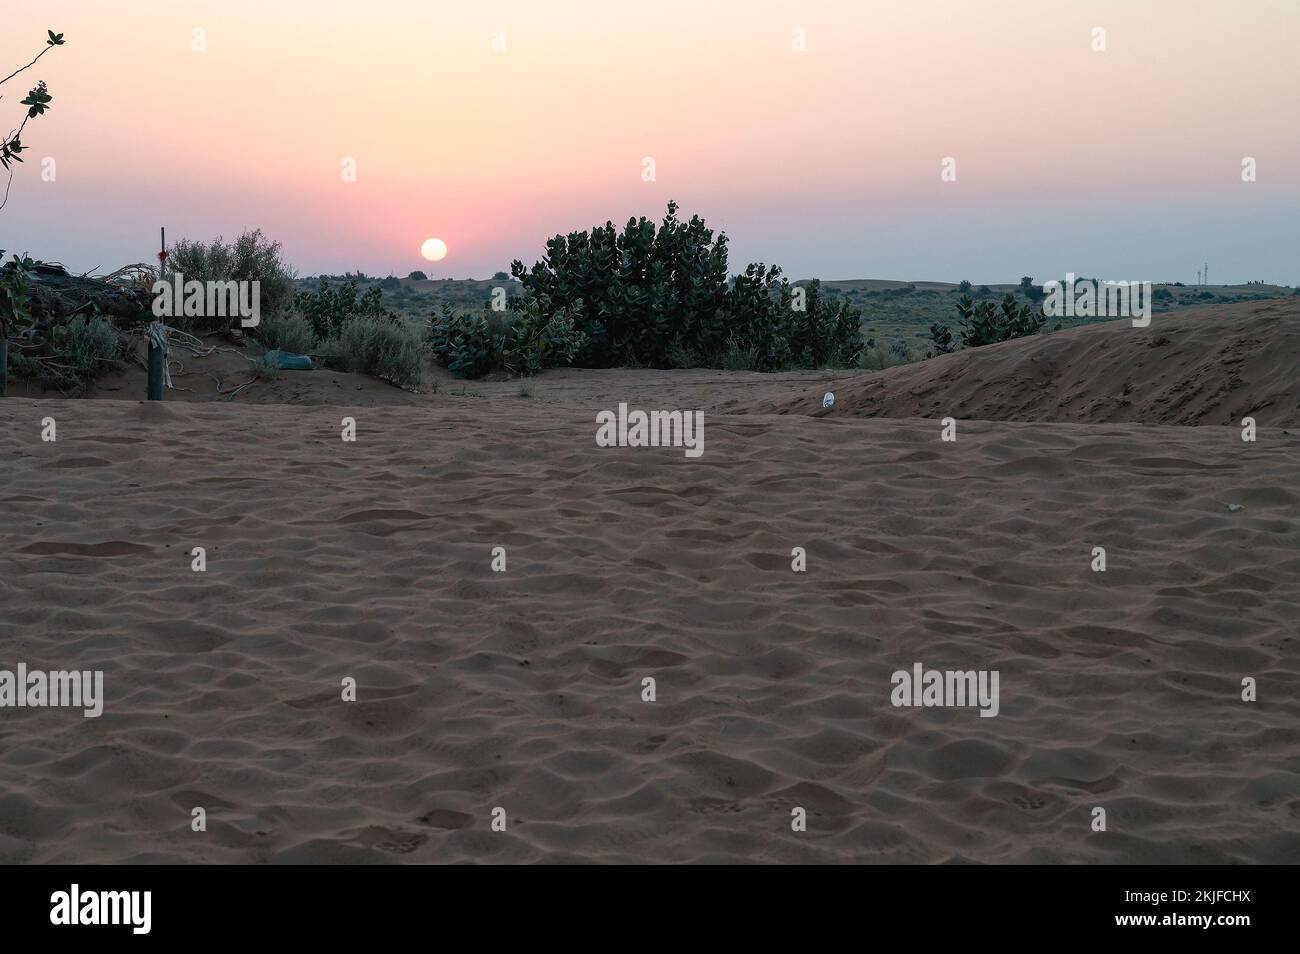 Sun rising at the horizon of Thar desert, Rajasthan, India. Tourists from across India visits to watch desert sun rise at Thar desert. Stock Photo